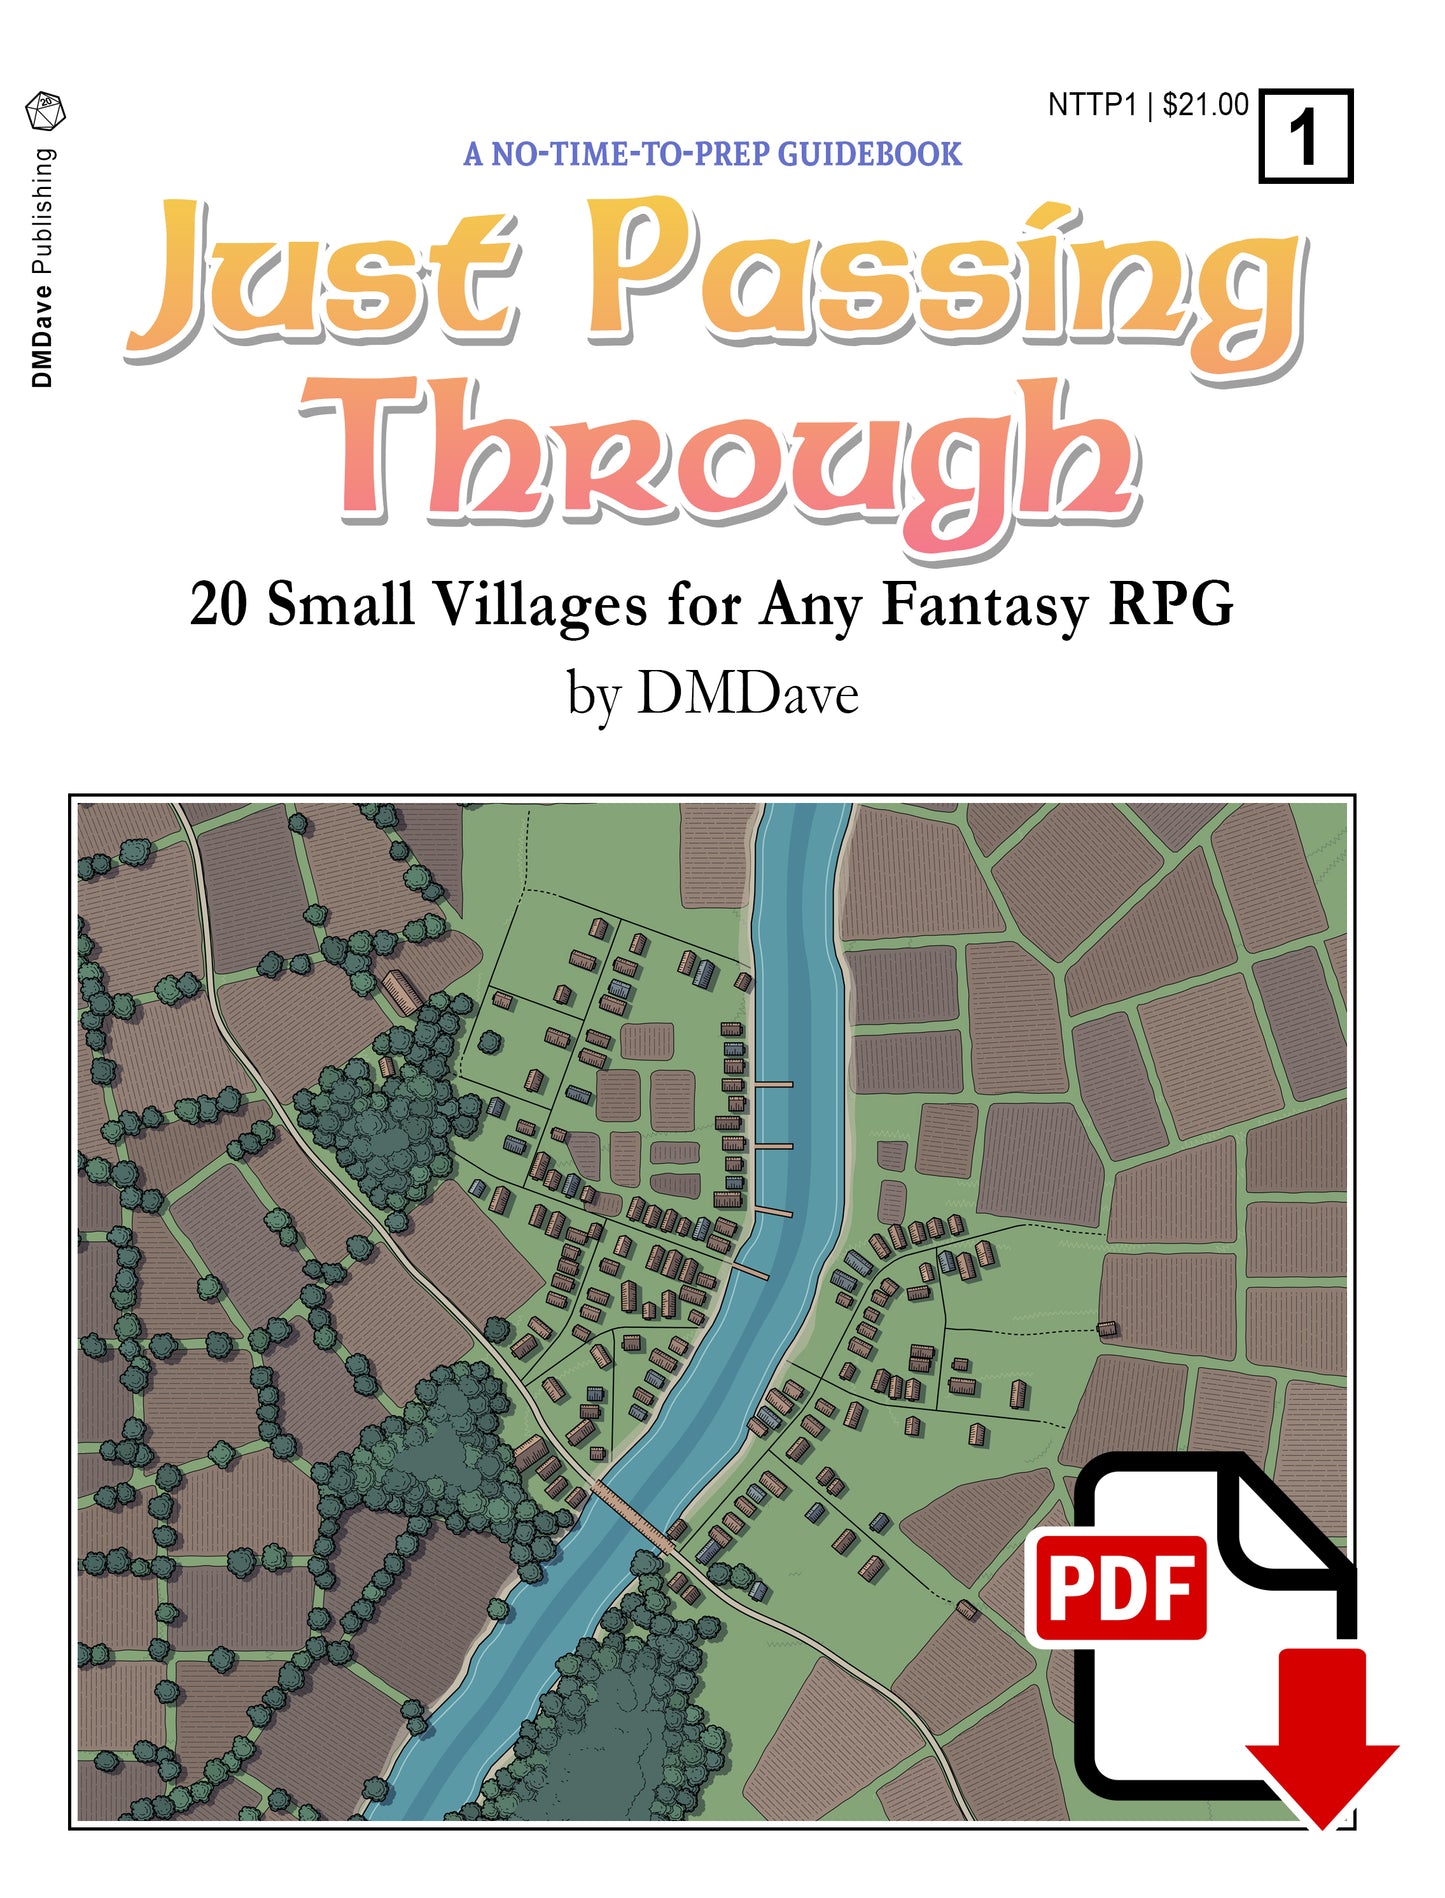 Just Passing Through: 20 Small Villages for Any Fantasy RPG (PDF Only)